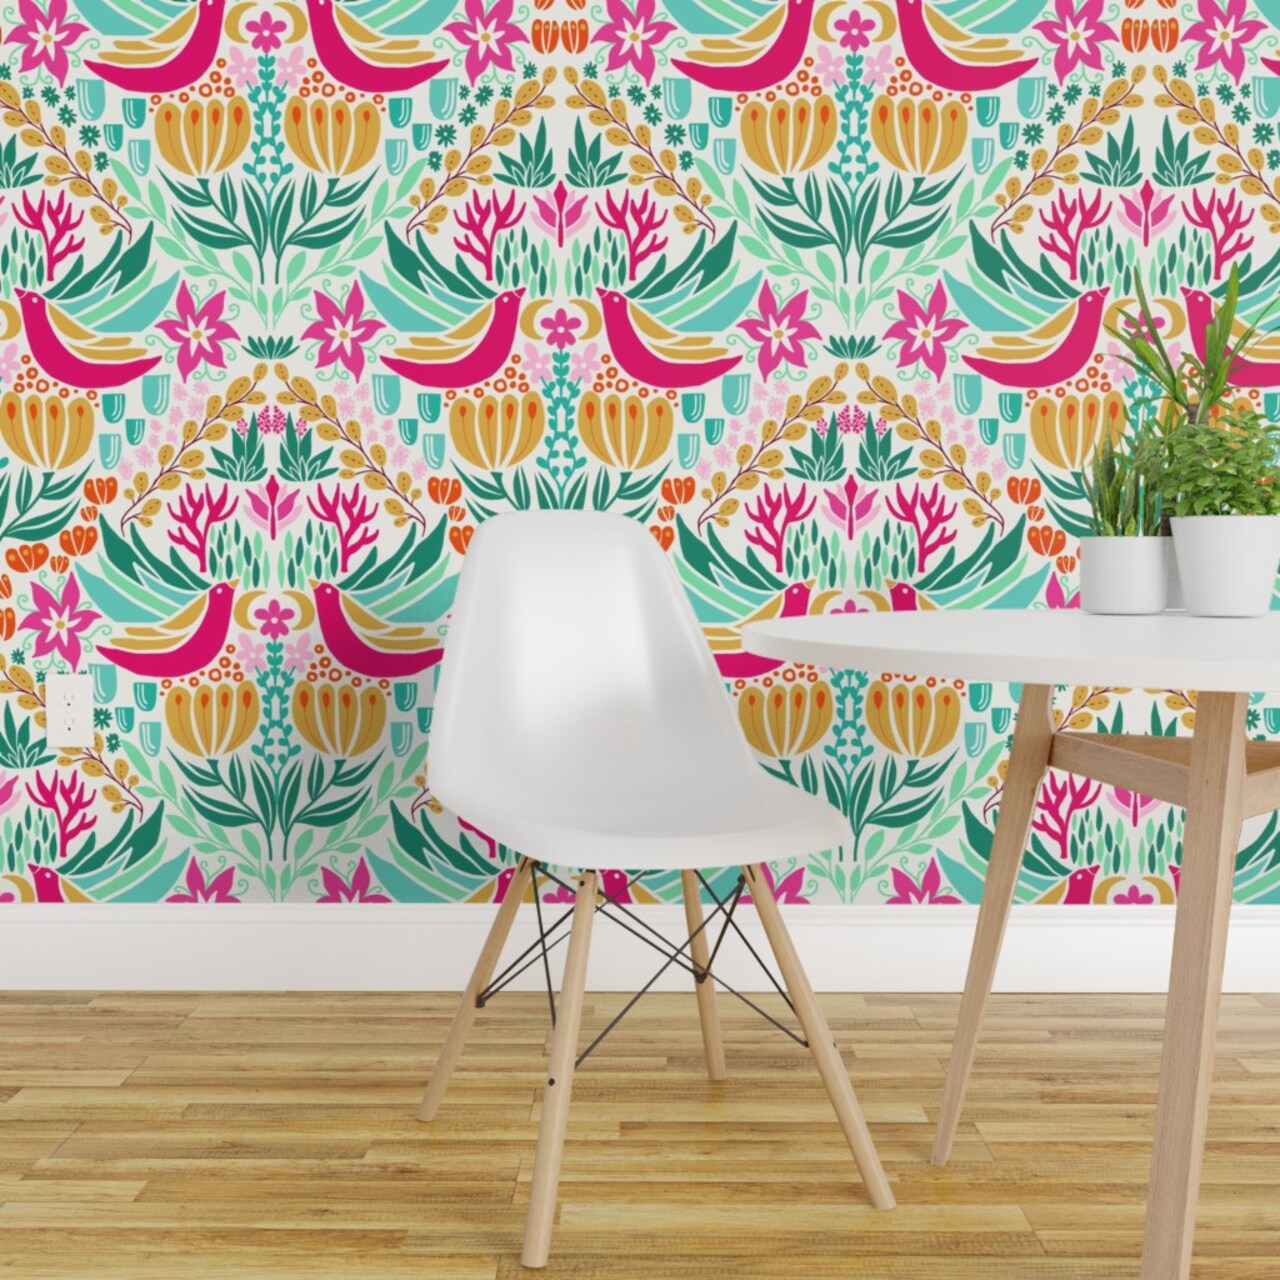 Peel &#x26; Stick Wallpaper 2FT Wide Colorful Birds Pink Green Boho Botanical Floral Custom Removable Wallpaper by Spoonflower